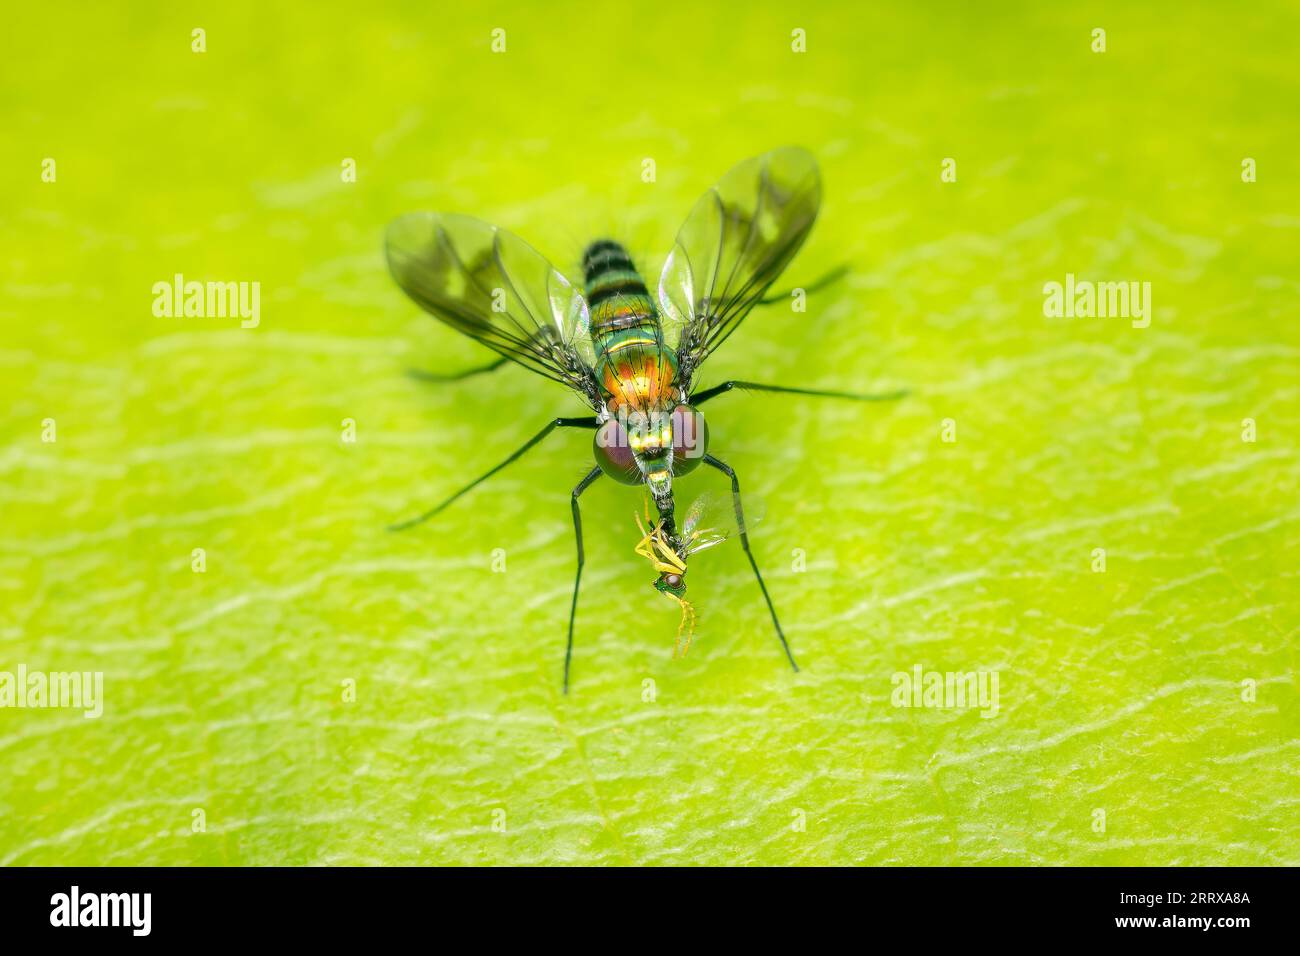 Long-legged fly and its prey on a green leaf with copy space Stock Photo